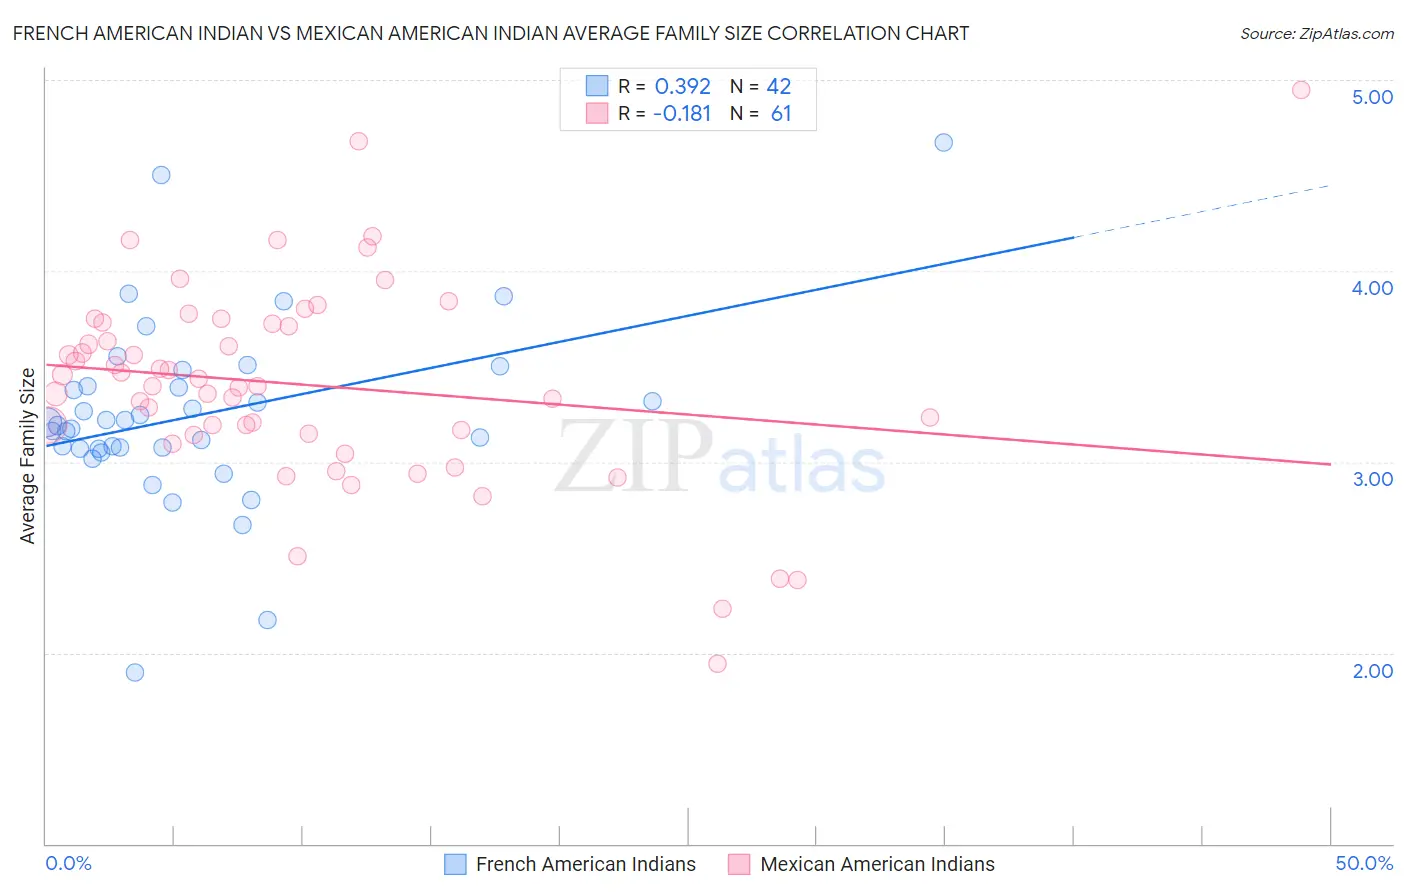 French American Indian vs Mexican American Indian Average Family Size